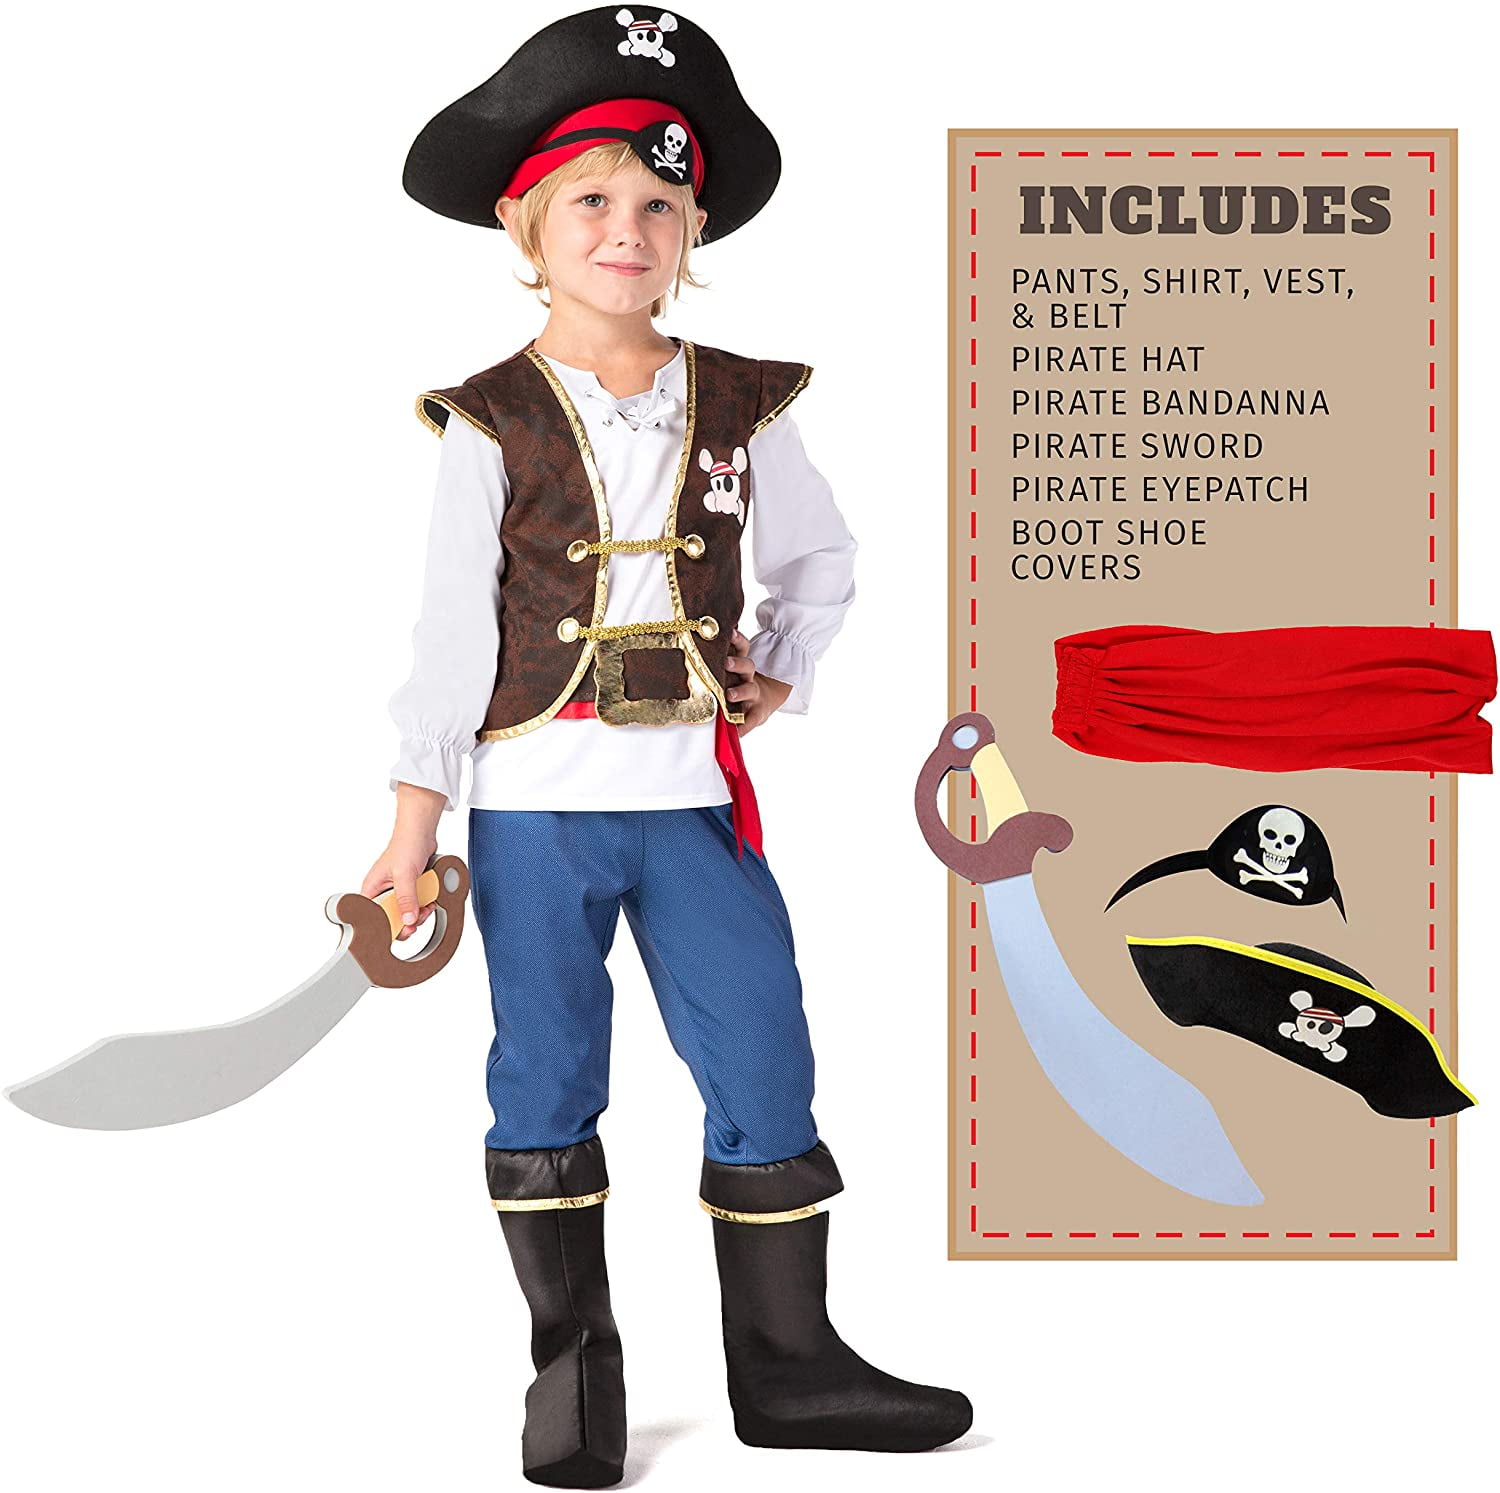 Gold Toy Boys Pirate Costume For Kids Deluxe Costume Set S 5 7 Size S